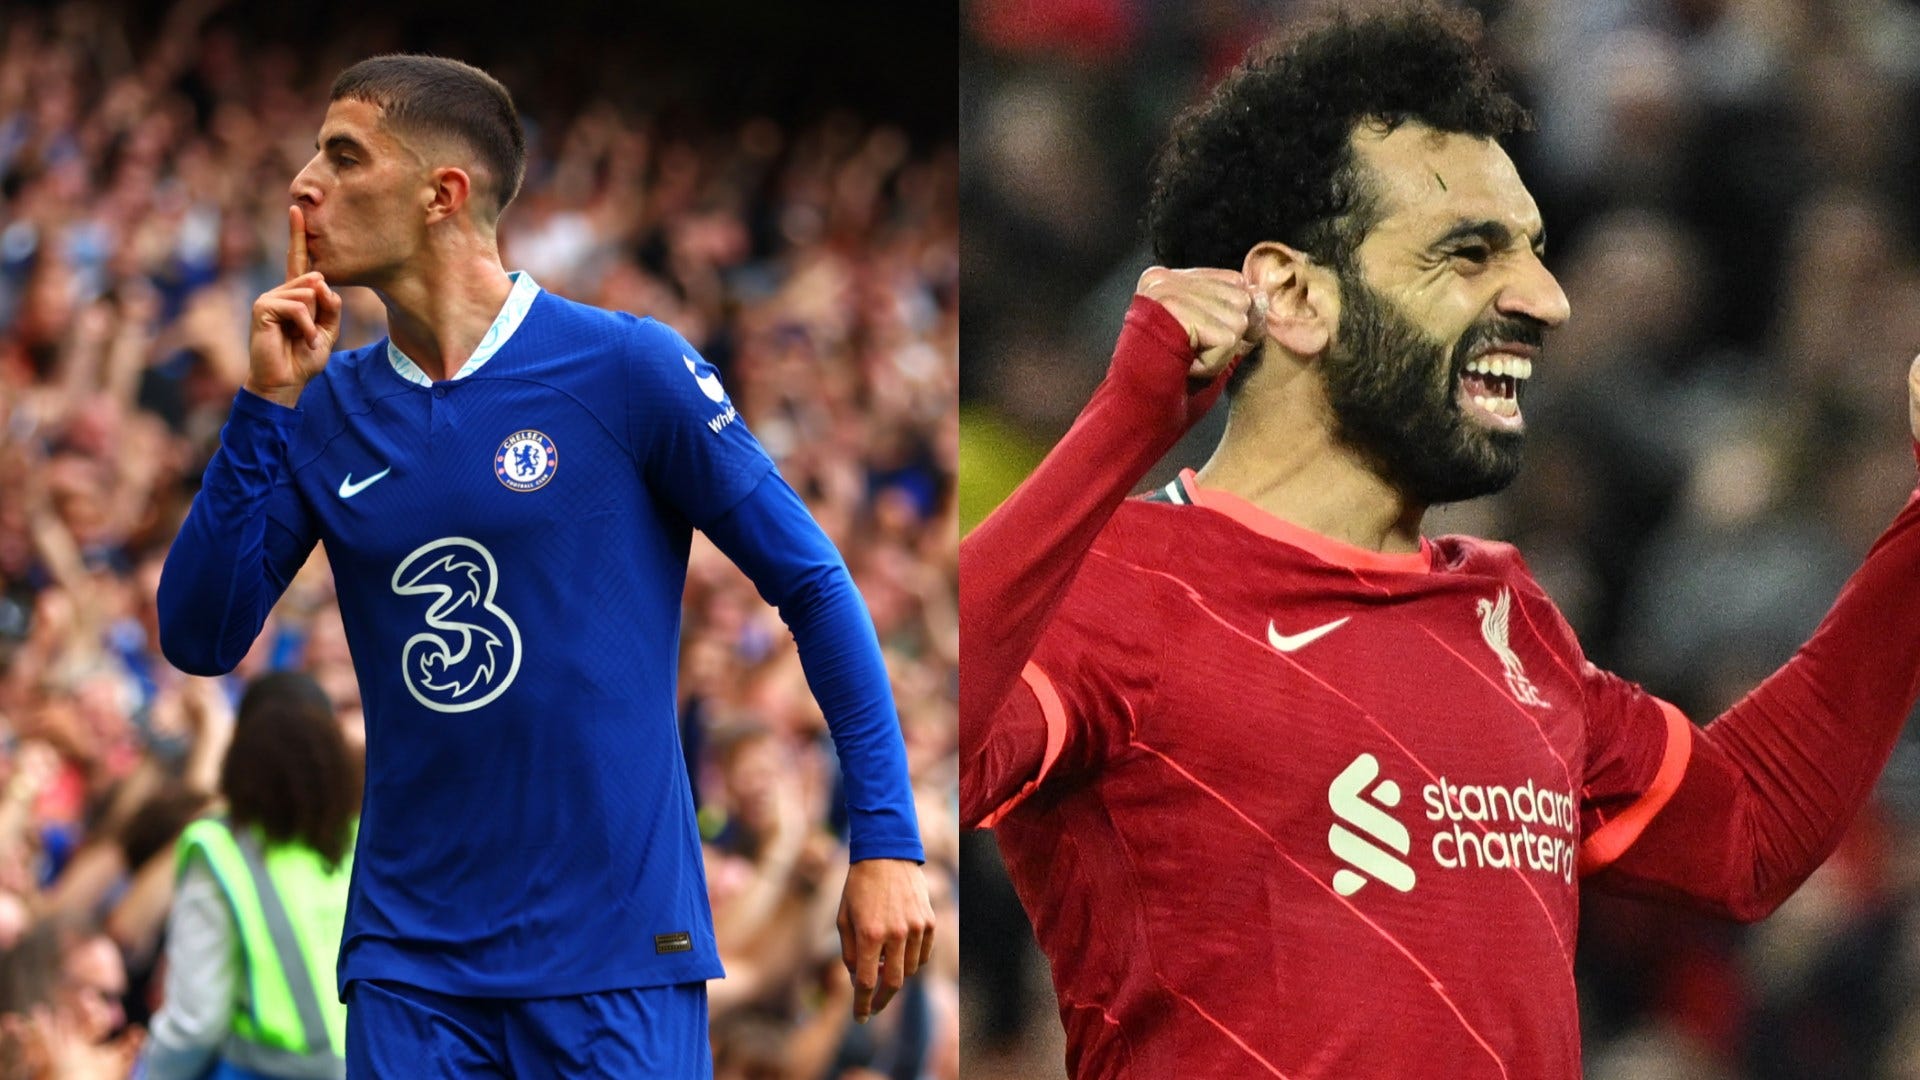 Chelsea vs Liverpool Where to watch the match online, live stream, TV channels and kick-off time Goal